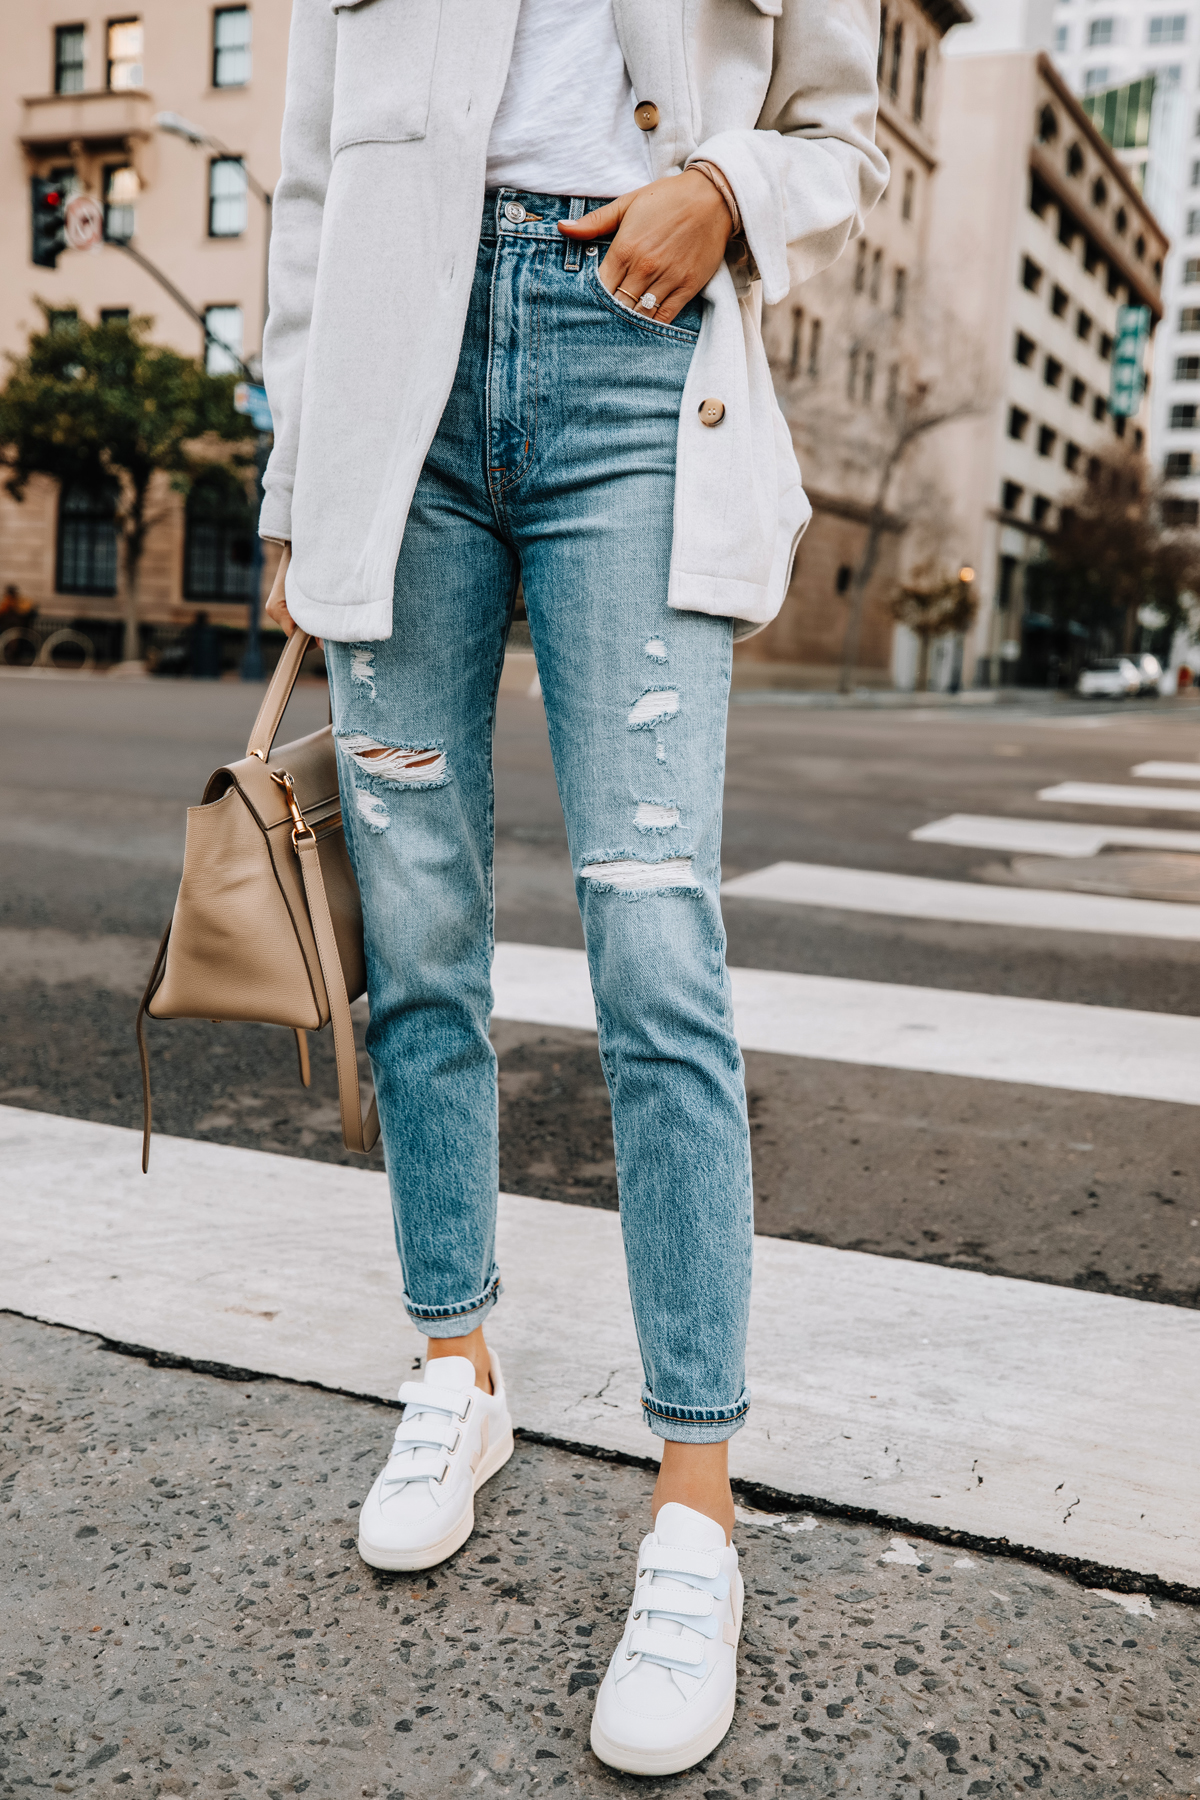 Three Pairs Of Shoes To Rock With A Shirt Dress - The Mom Edit